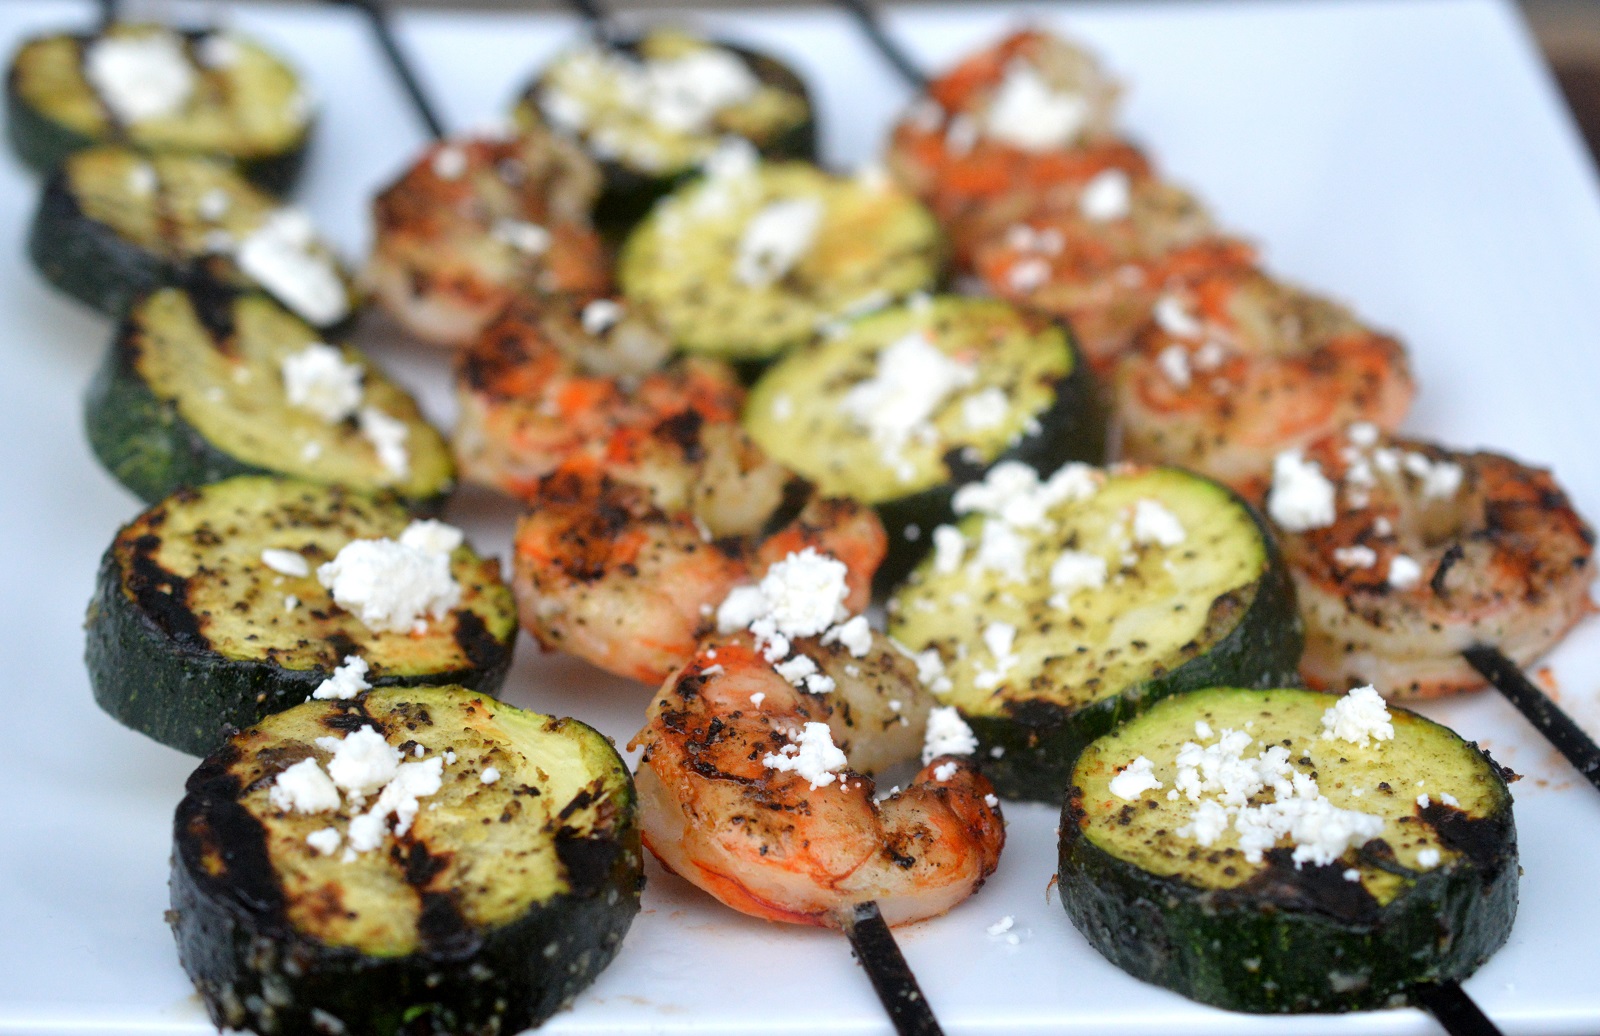 Zucchini & Shrimp Kebabs with Feta Cheese